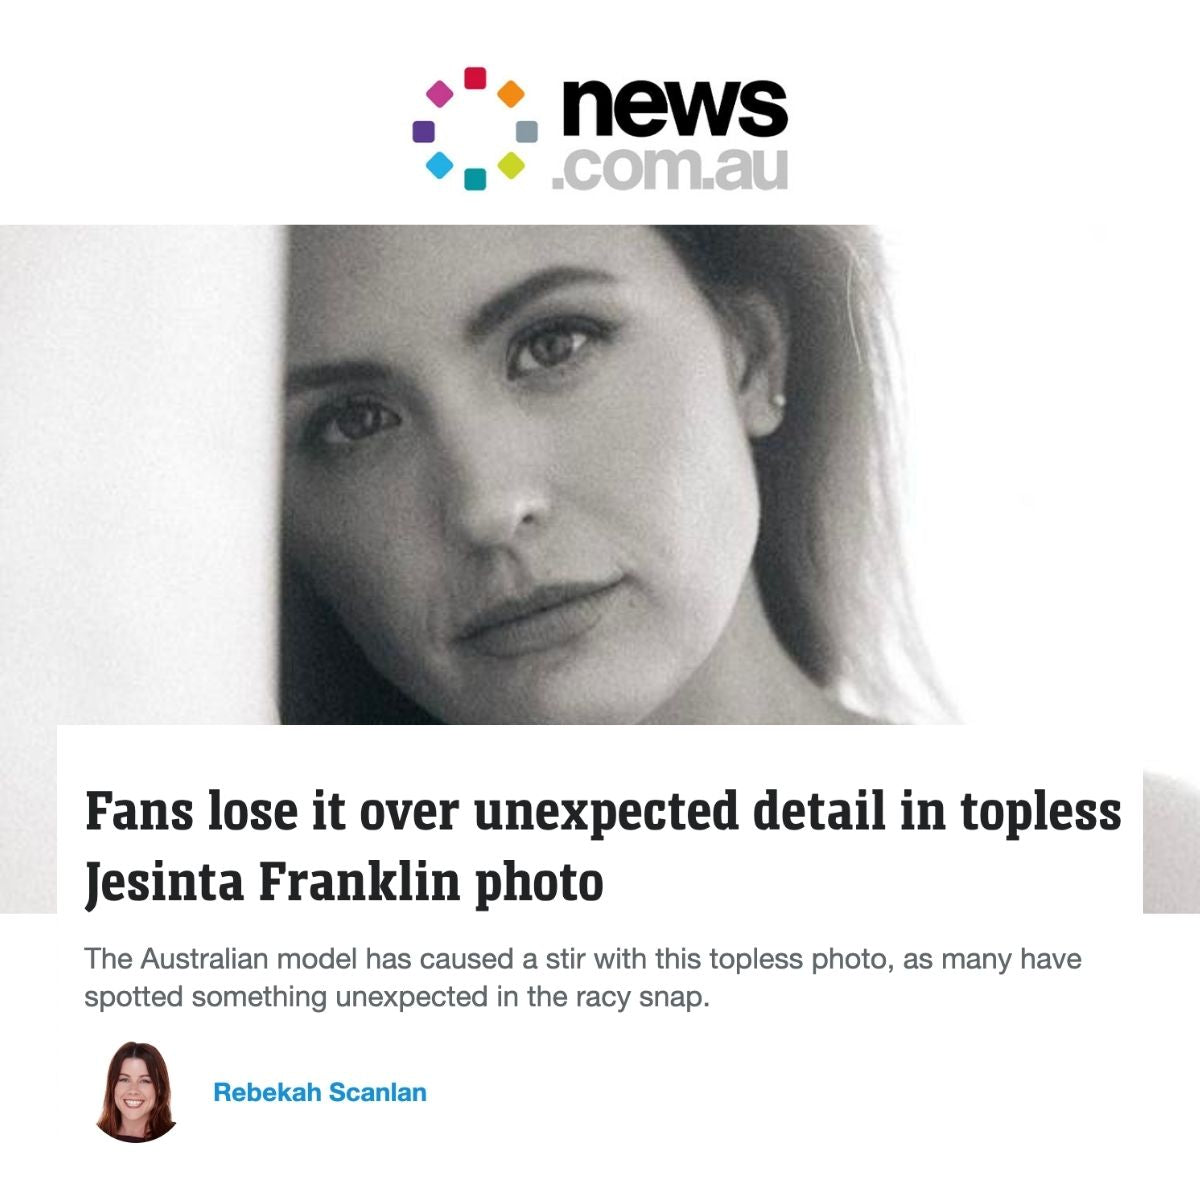 Fans lose it over unexpected detail in topless Jesinta Franklin photo